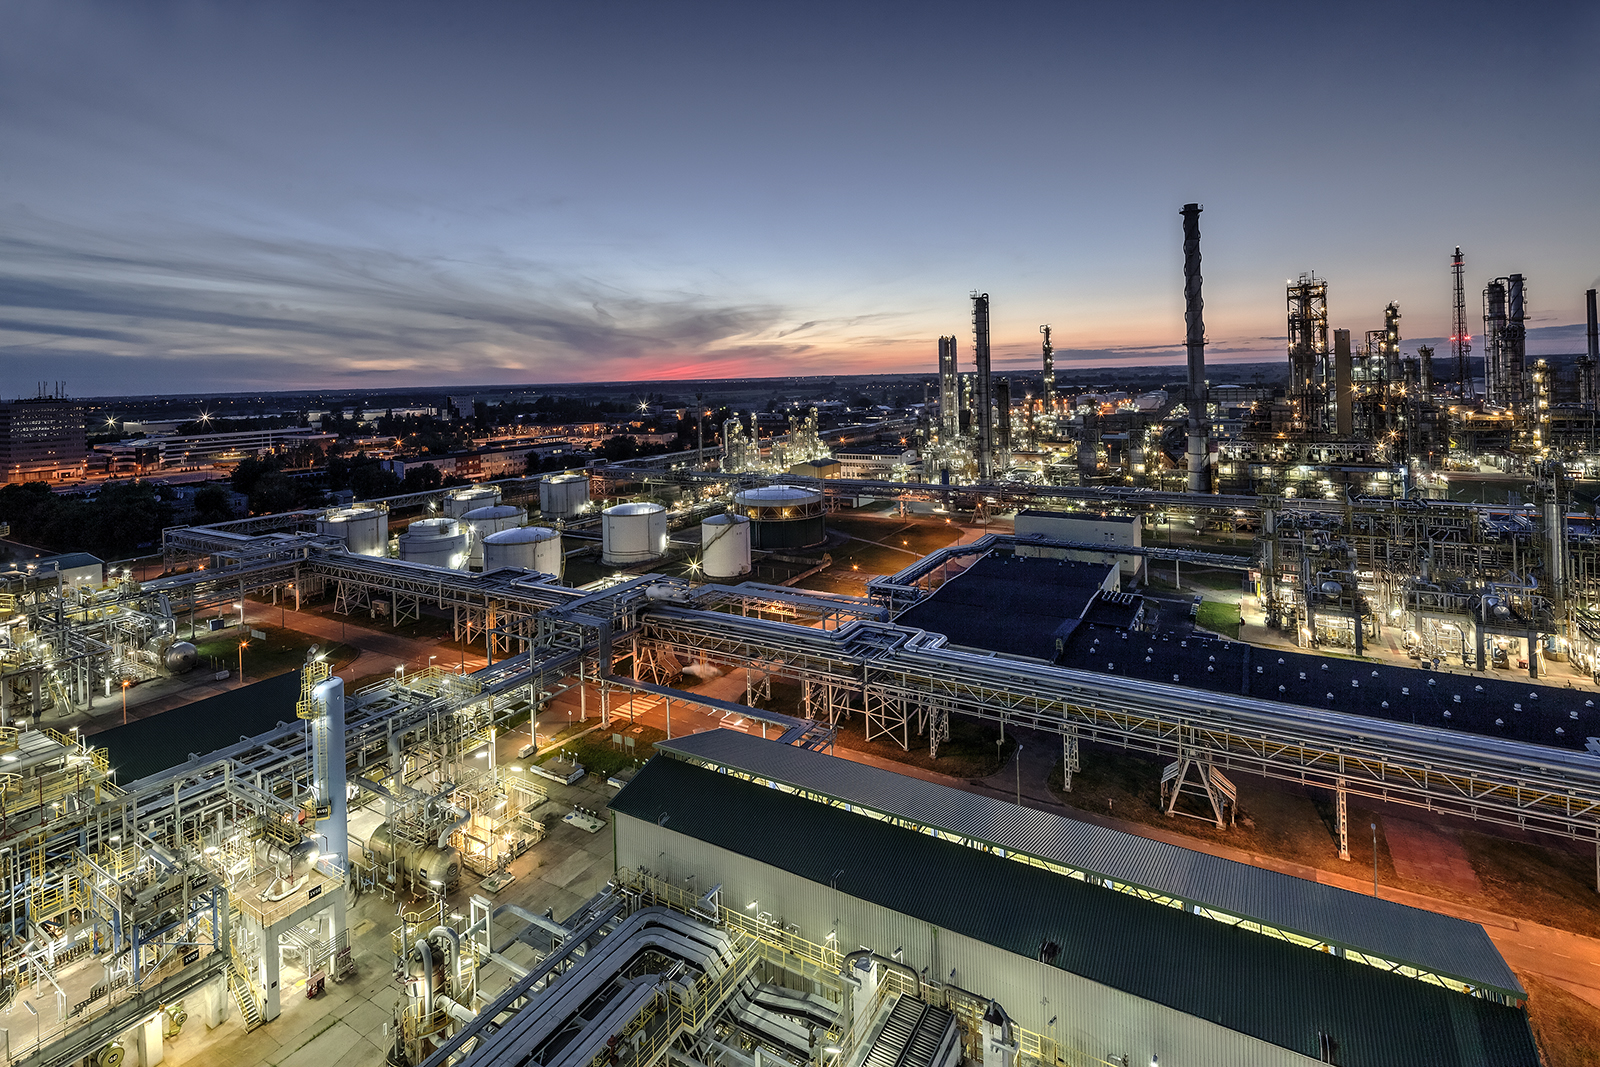 PKN ORLEN invests to develop its refining and petrochemical production - MarinePoland.com